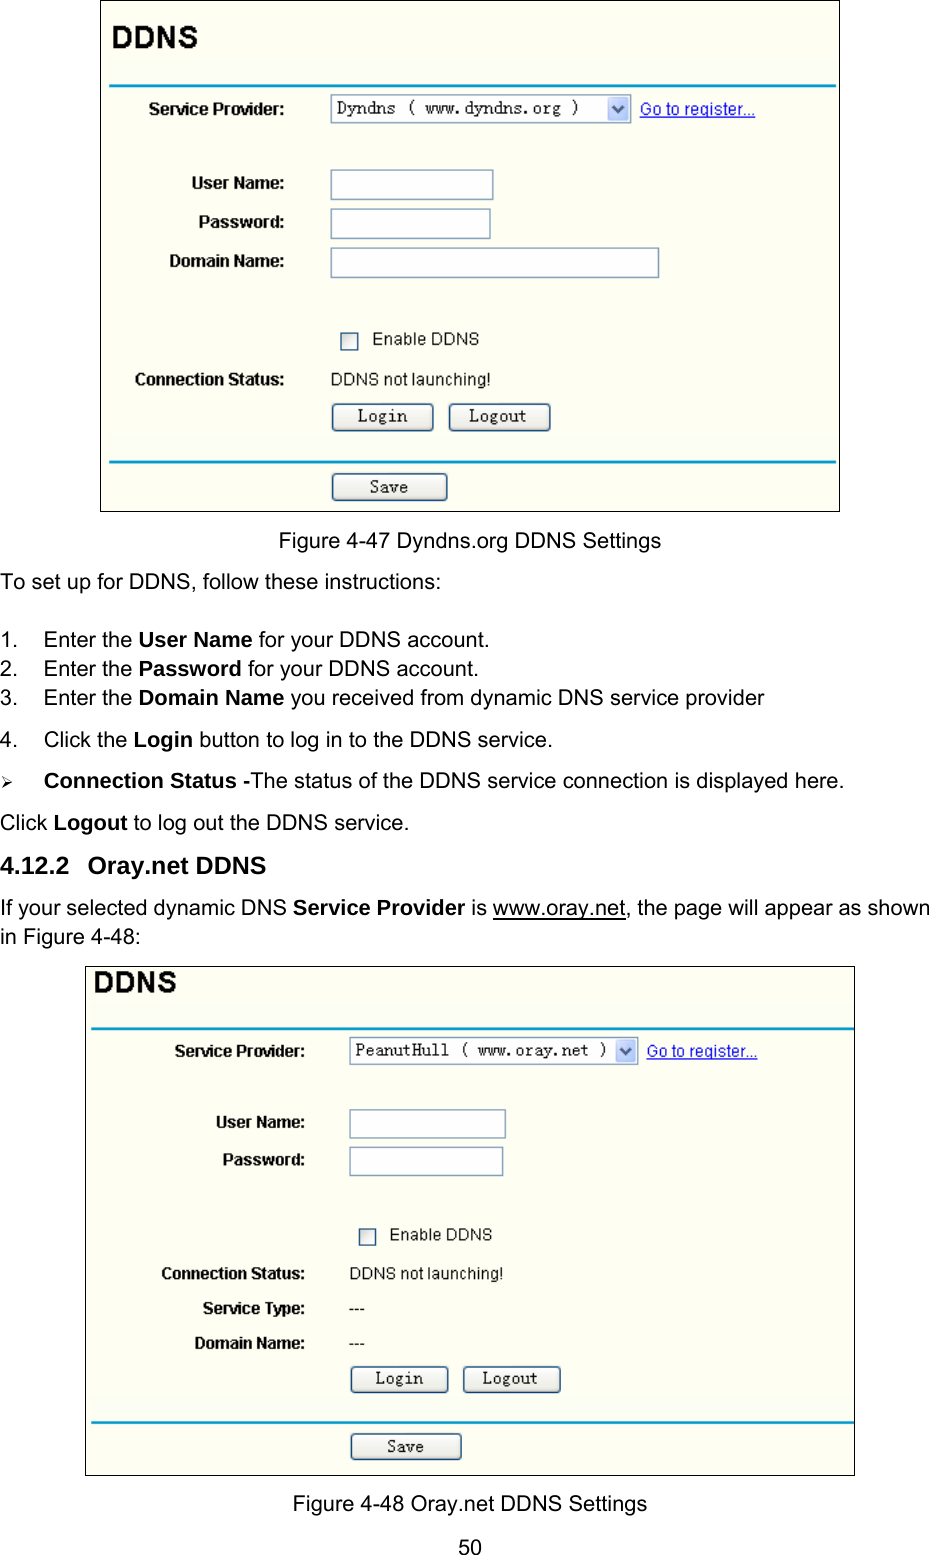  50  Figure 4-47 Dyndns.org DDNS Settings To set up for DDNS, follow these instructions: 1. Enter the User Name for your DDNS account. 2. Enter the Password for your DDNS account. 3. Enter the Domain Name you received from dynamic DNS service provider   4. Click the Login button to log in to the DDNS service. ¾ Connection Status -The status of the DDNS service connection is displayed here. Click Logout to log out the DDNS service. 4.12.2  Oray.net DDNS If your selected dynamic DNS Service Provider is www.oray.net, the page will appear as shown in Figure 4-48:  Figure 4-48 Oray.net DDNS Settings 